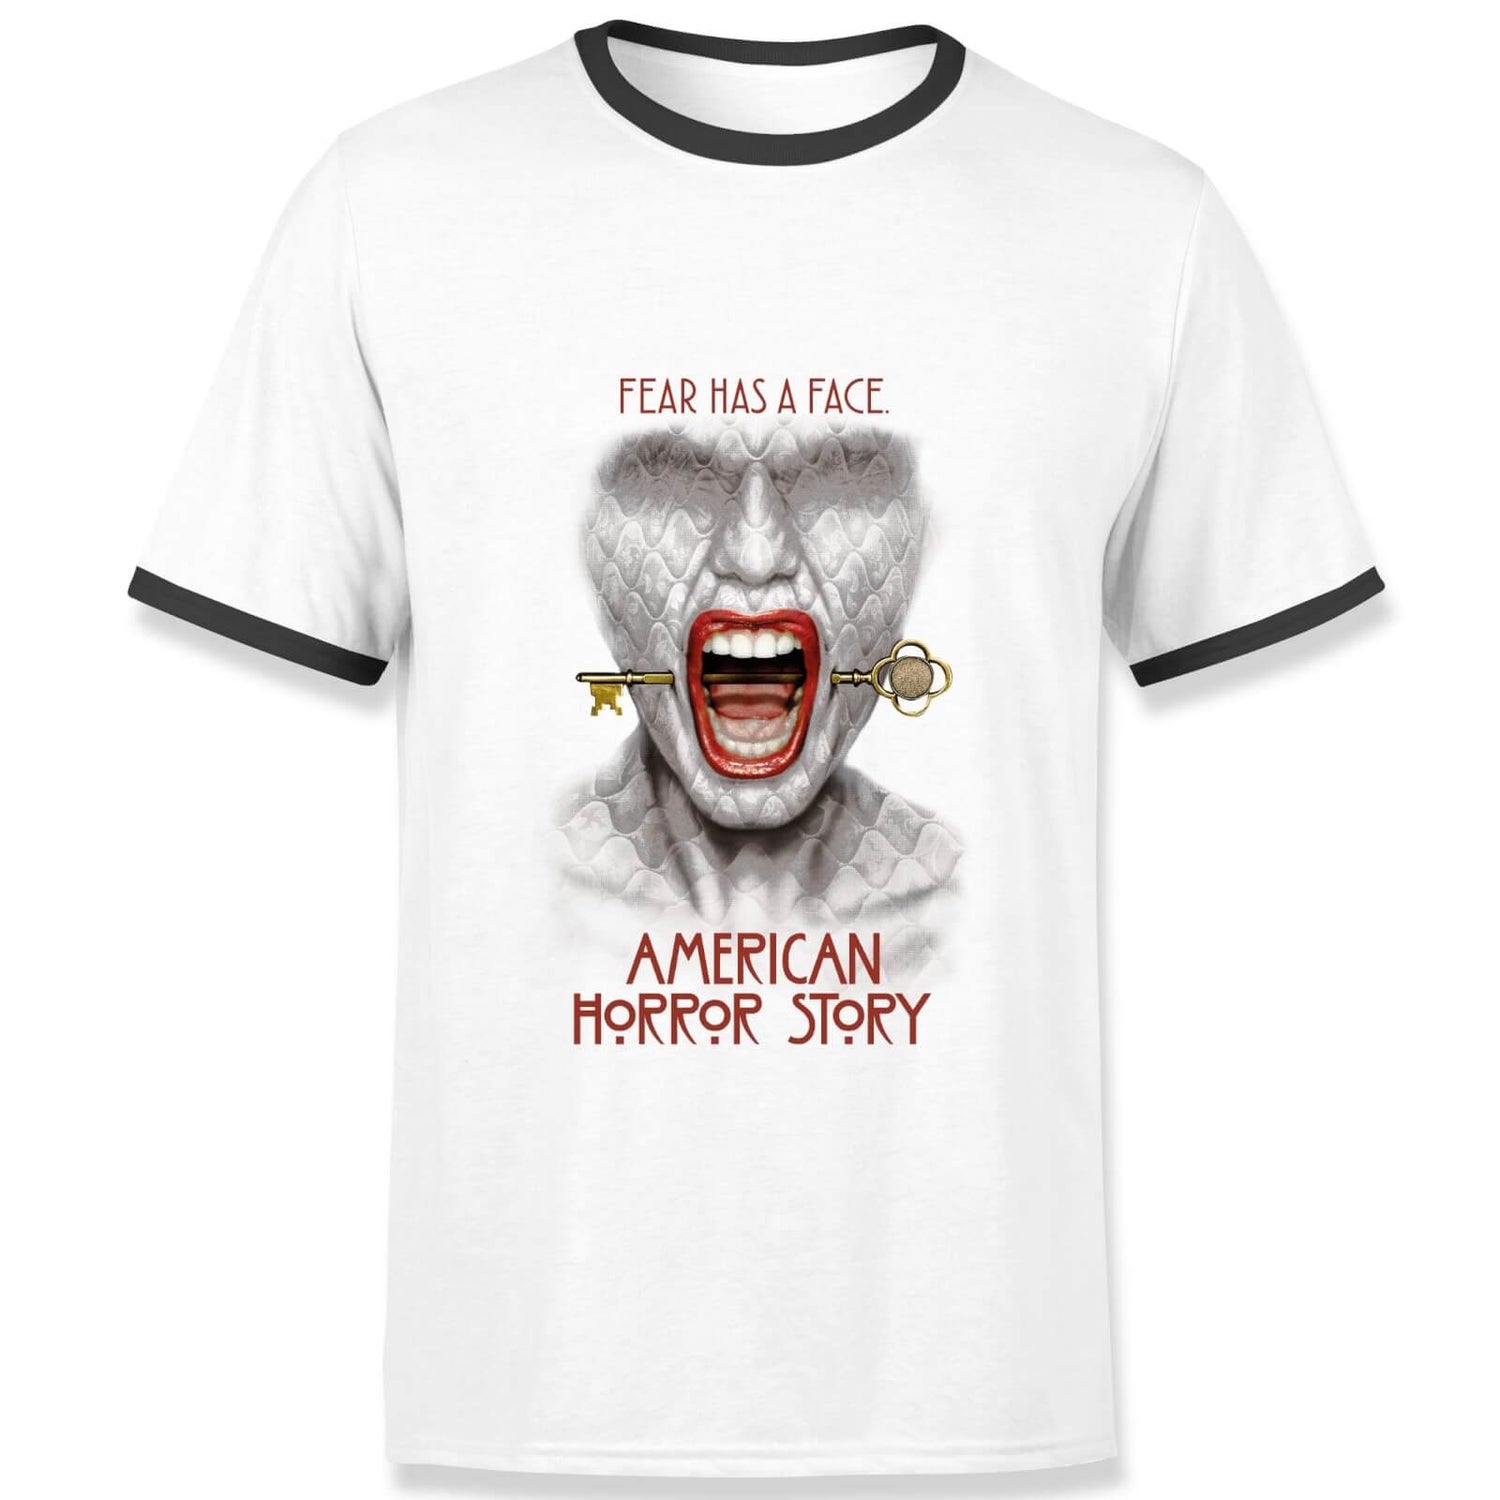 American Horror Story Fear Has A Face Men's Ringer T-Shirt - Charcoal/Black